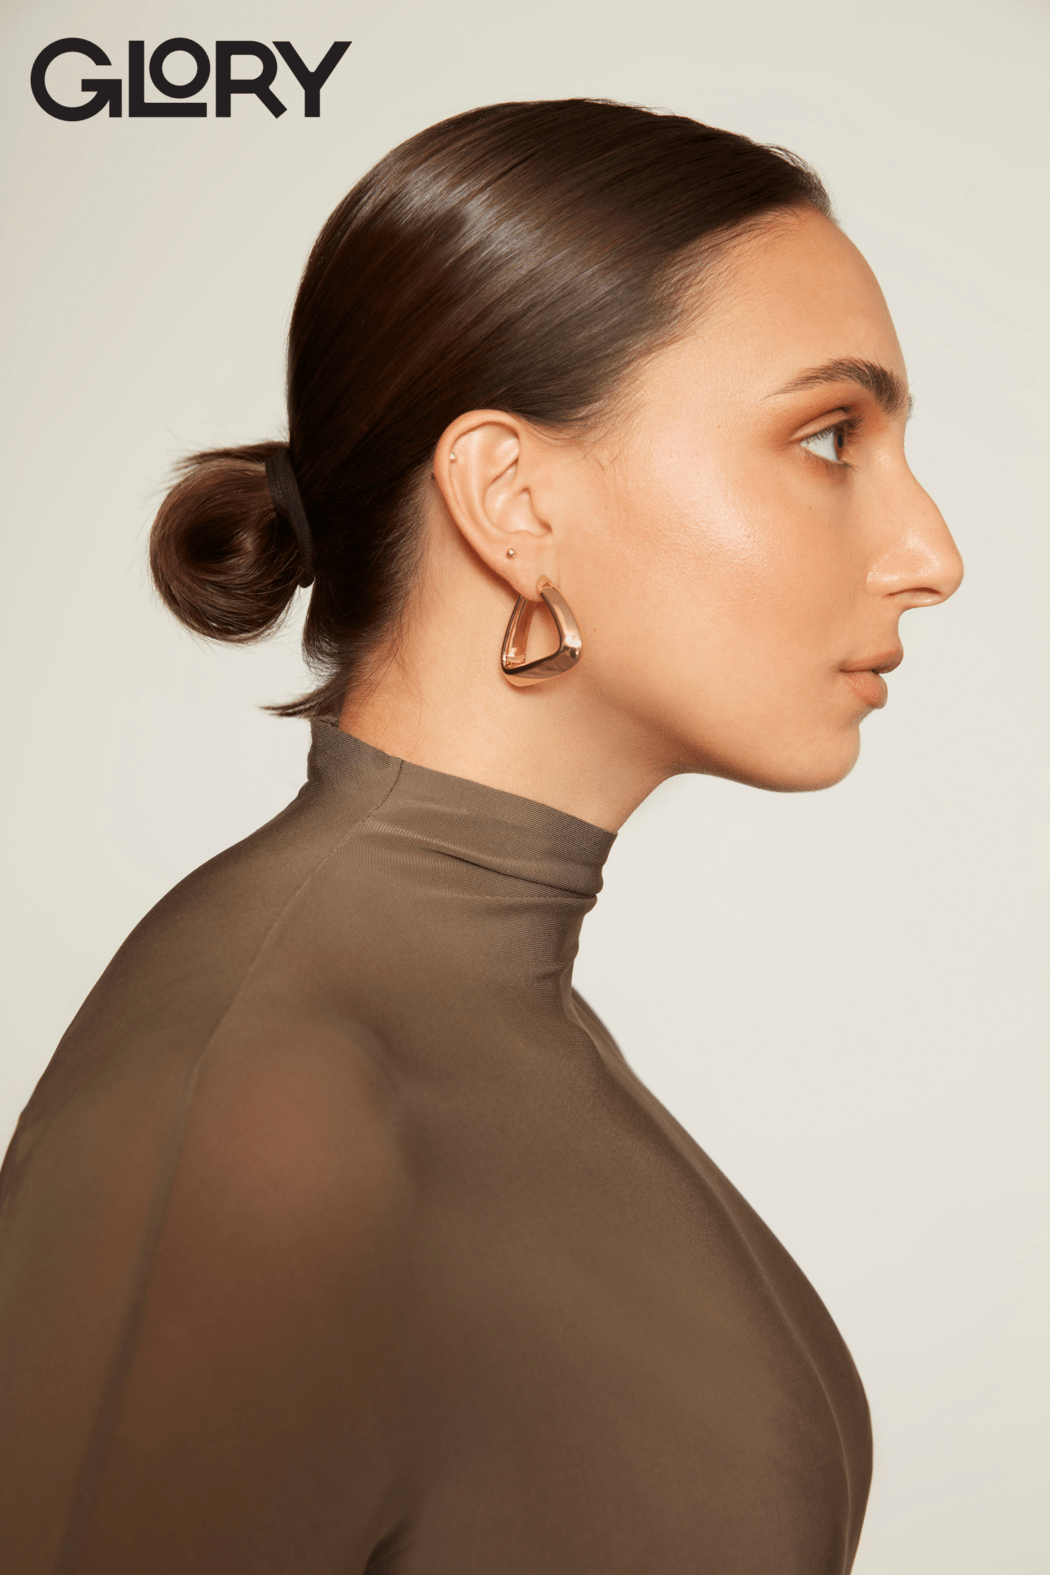 Side profile of Marissa Papaconstantinou wearing a sheer taupe dress. Her hair is tied in a tight bun and she is wearing gold earrings.